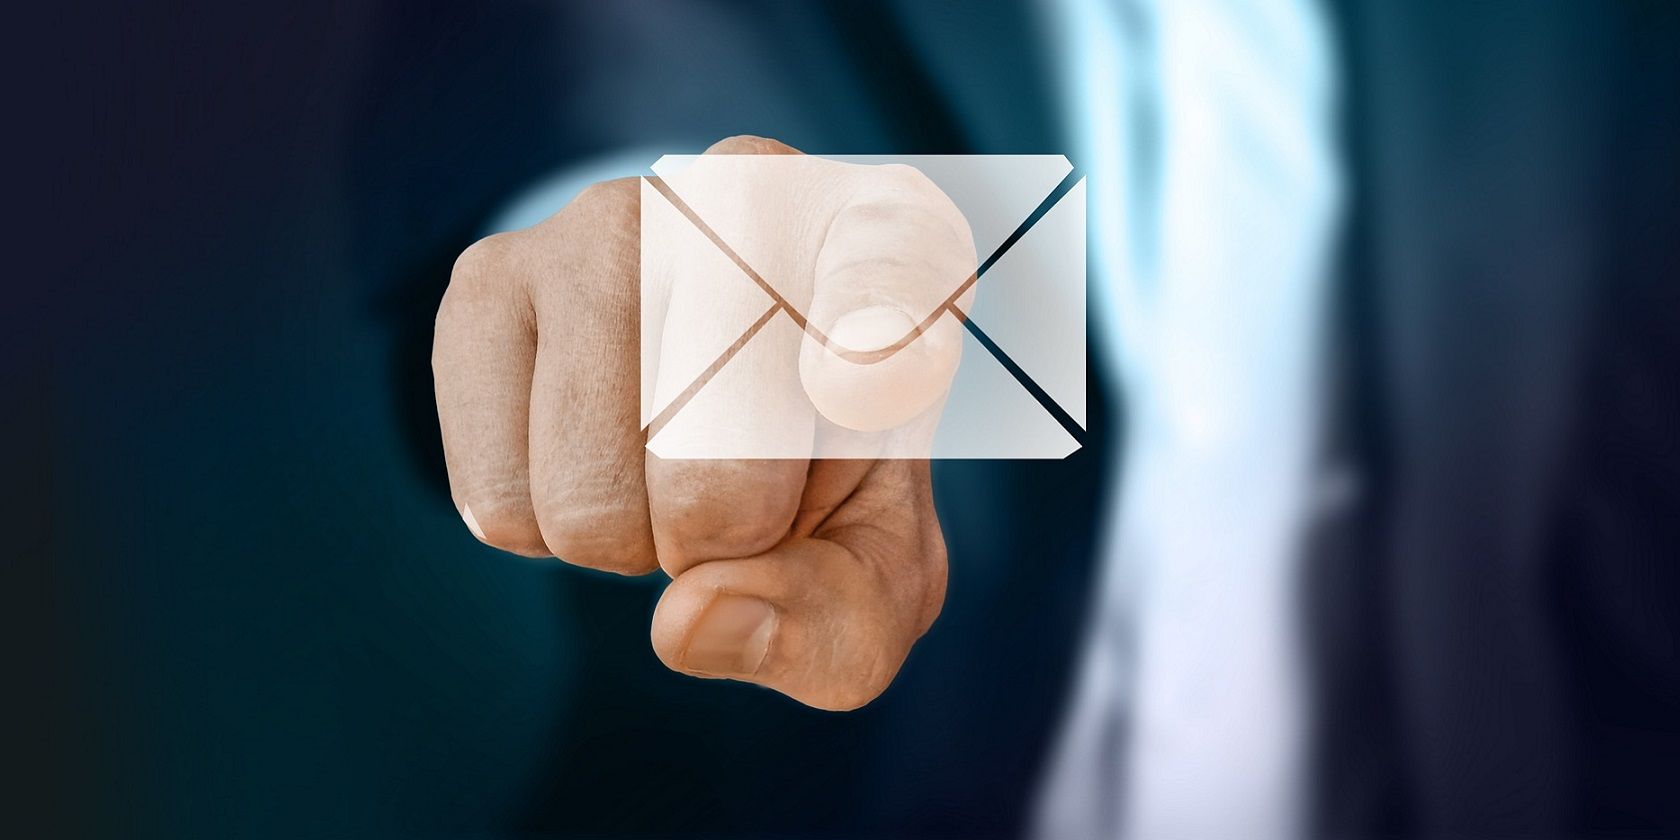 Ann email messaging symbol 